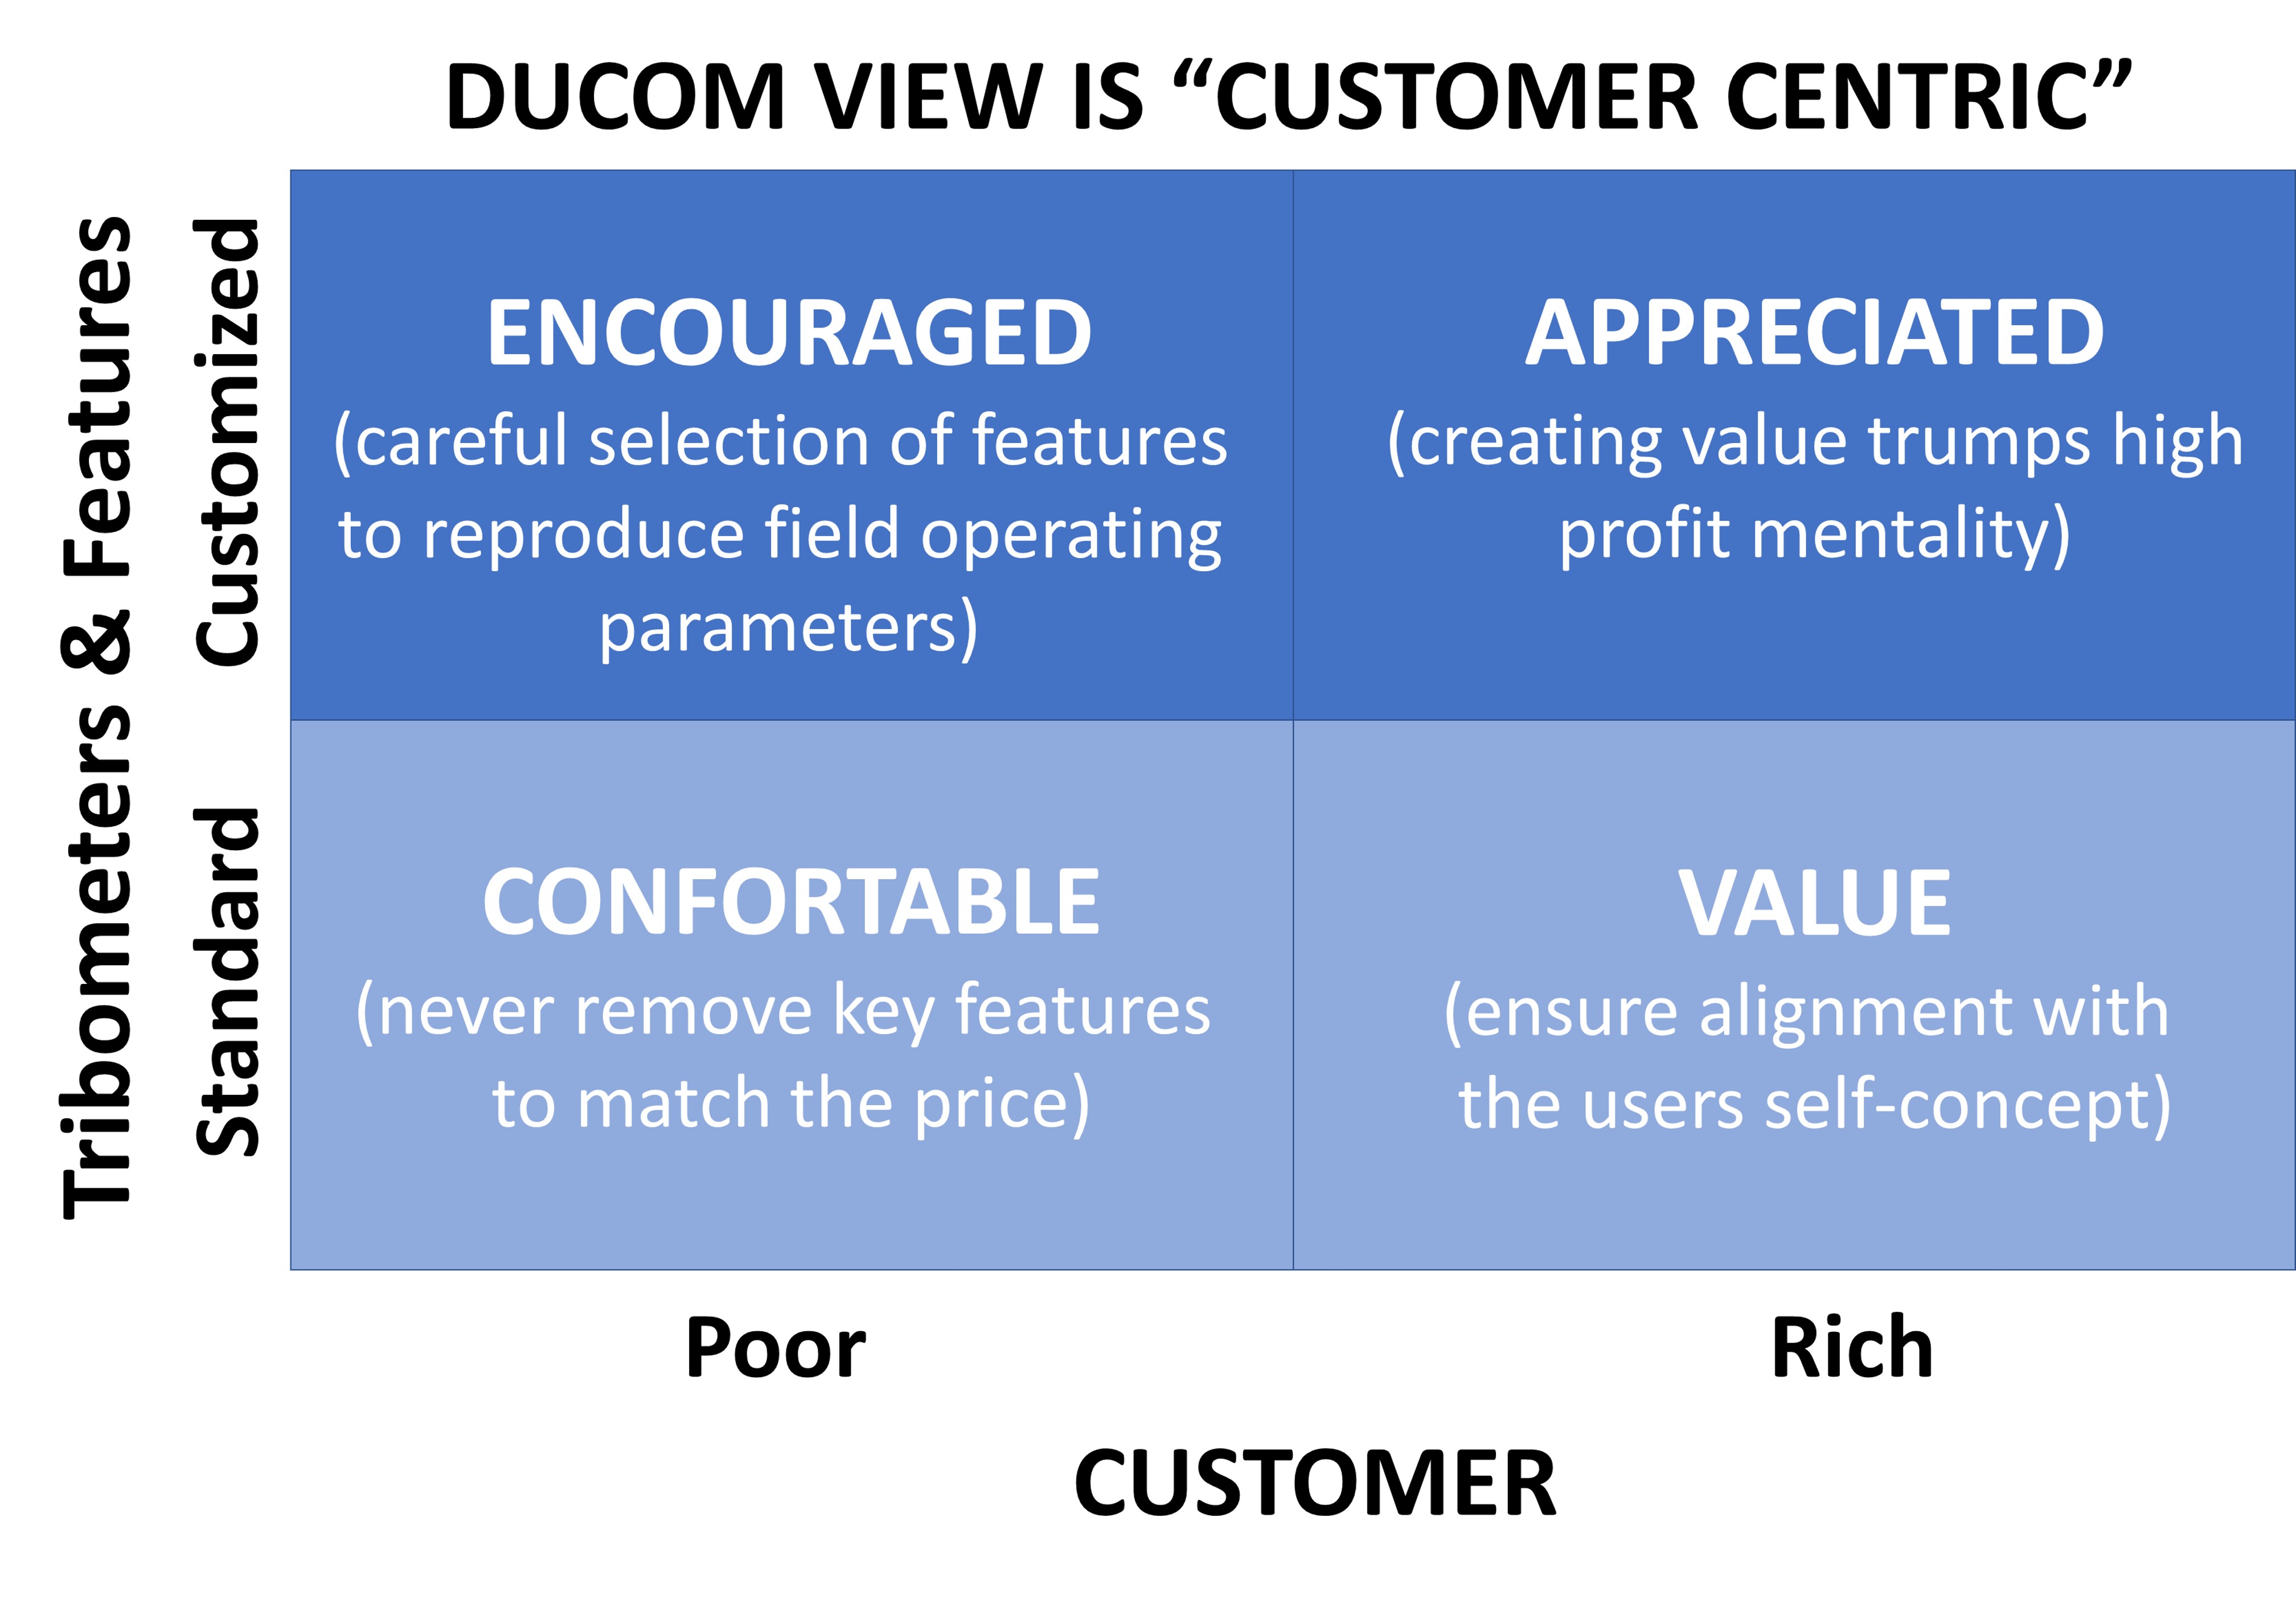 Ducom view is customer centric